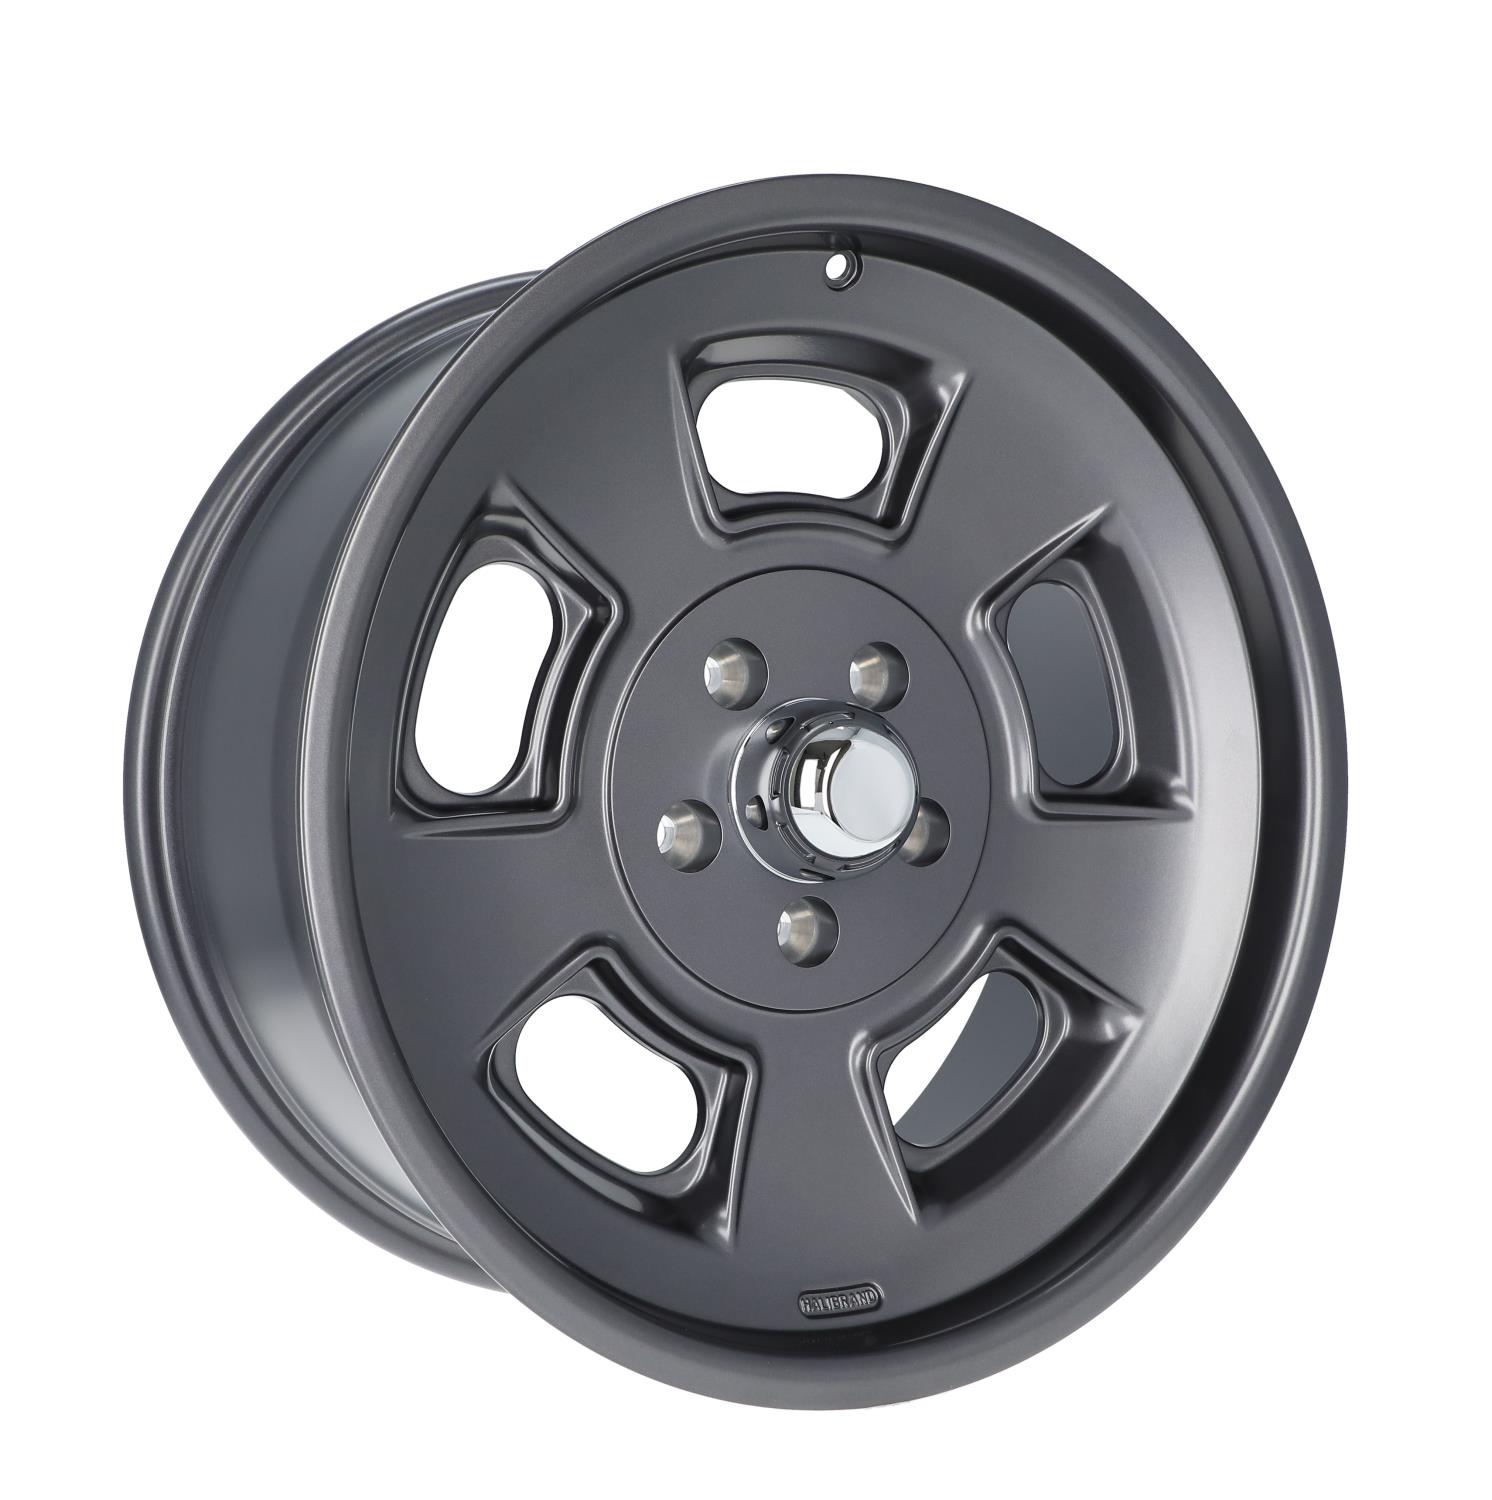 Sprint Front Wheel, Size: 19x8.5", Bolt Pattern: 5x5", Backspace: 5.25" [Anthracite - Semi Gloss Clearcoat]